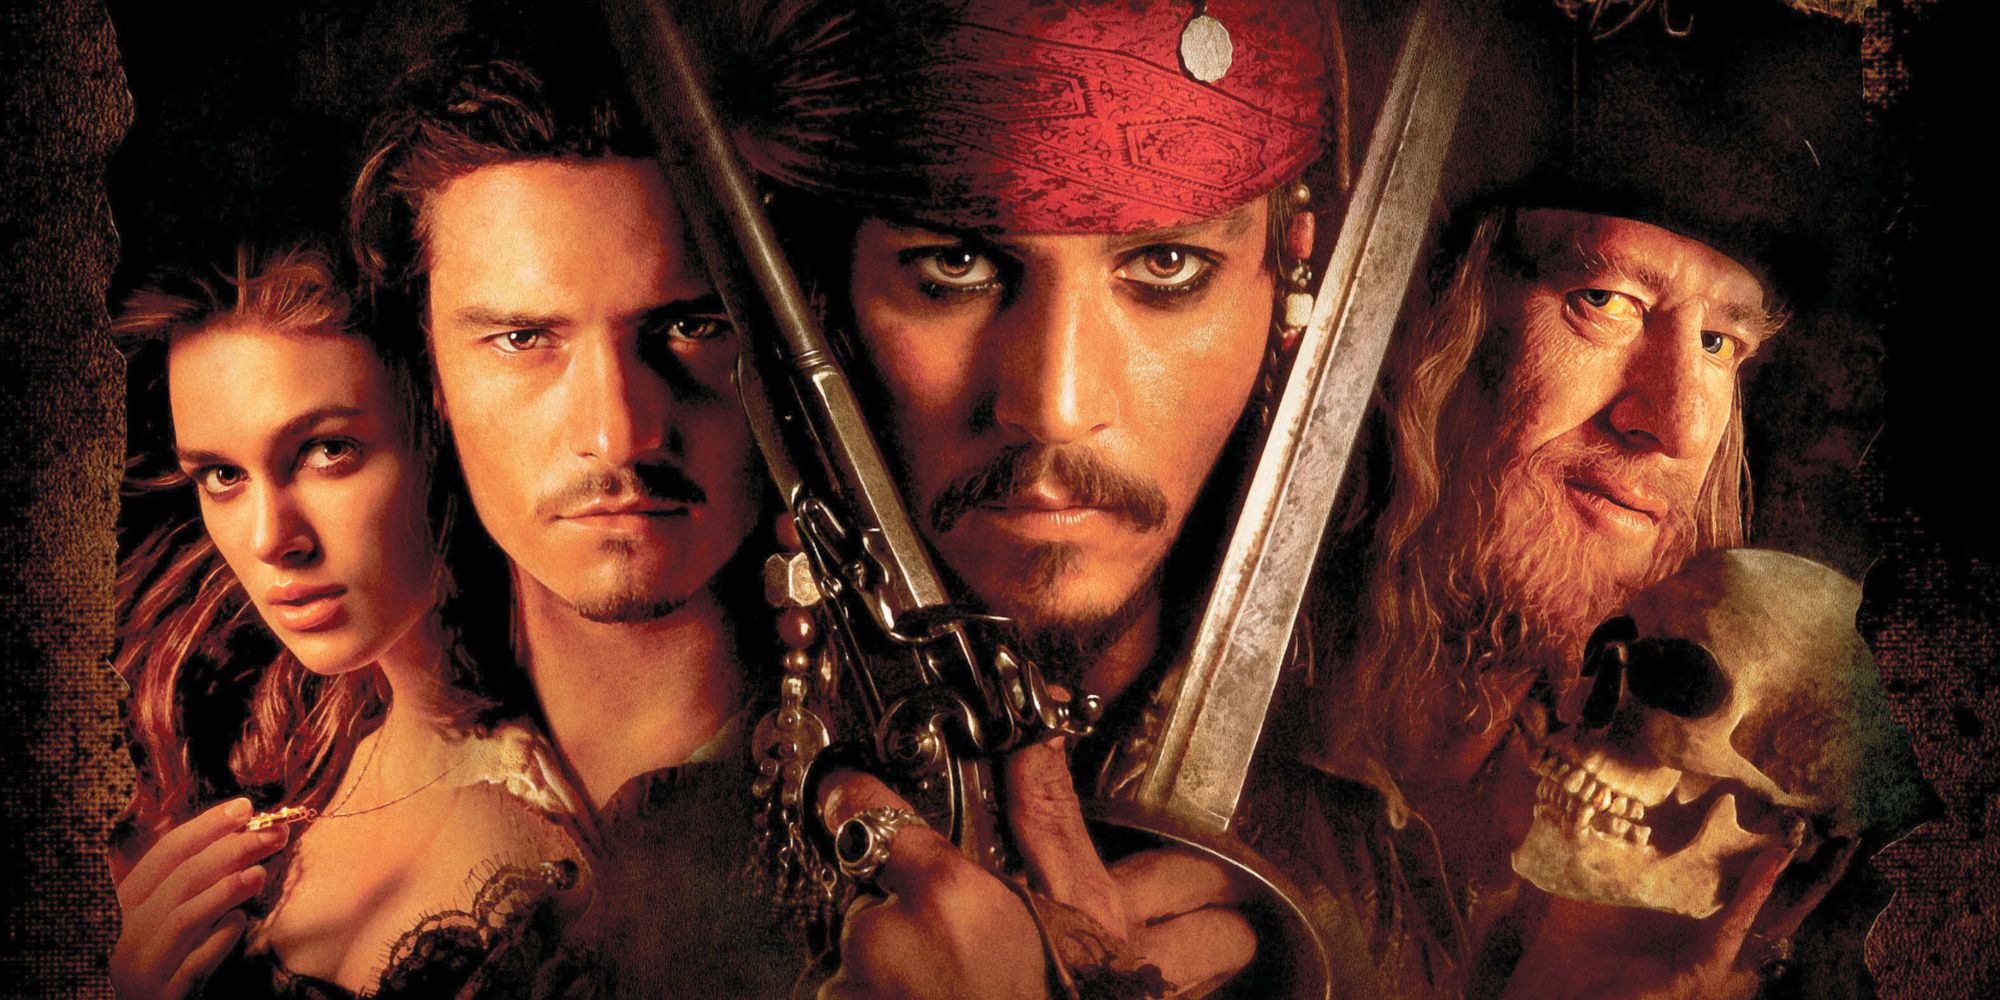 pirates of the caribbean the curse of the black pearl poster